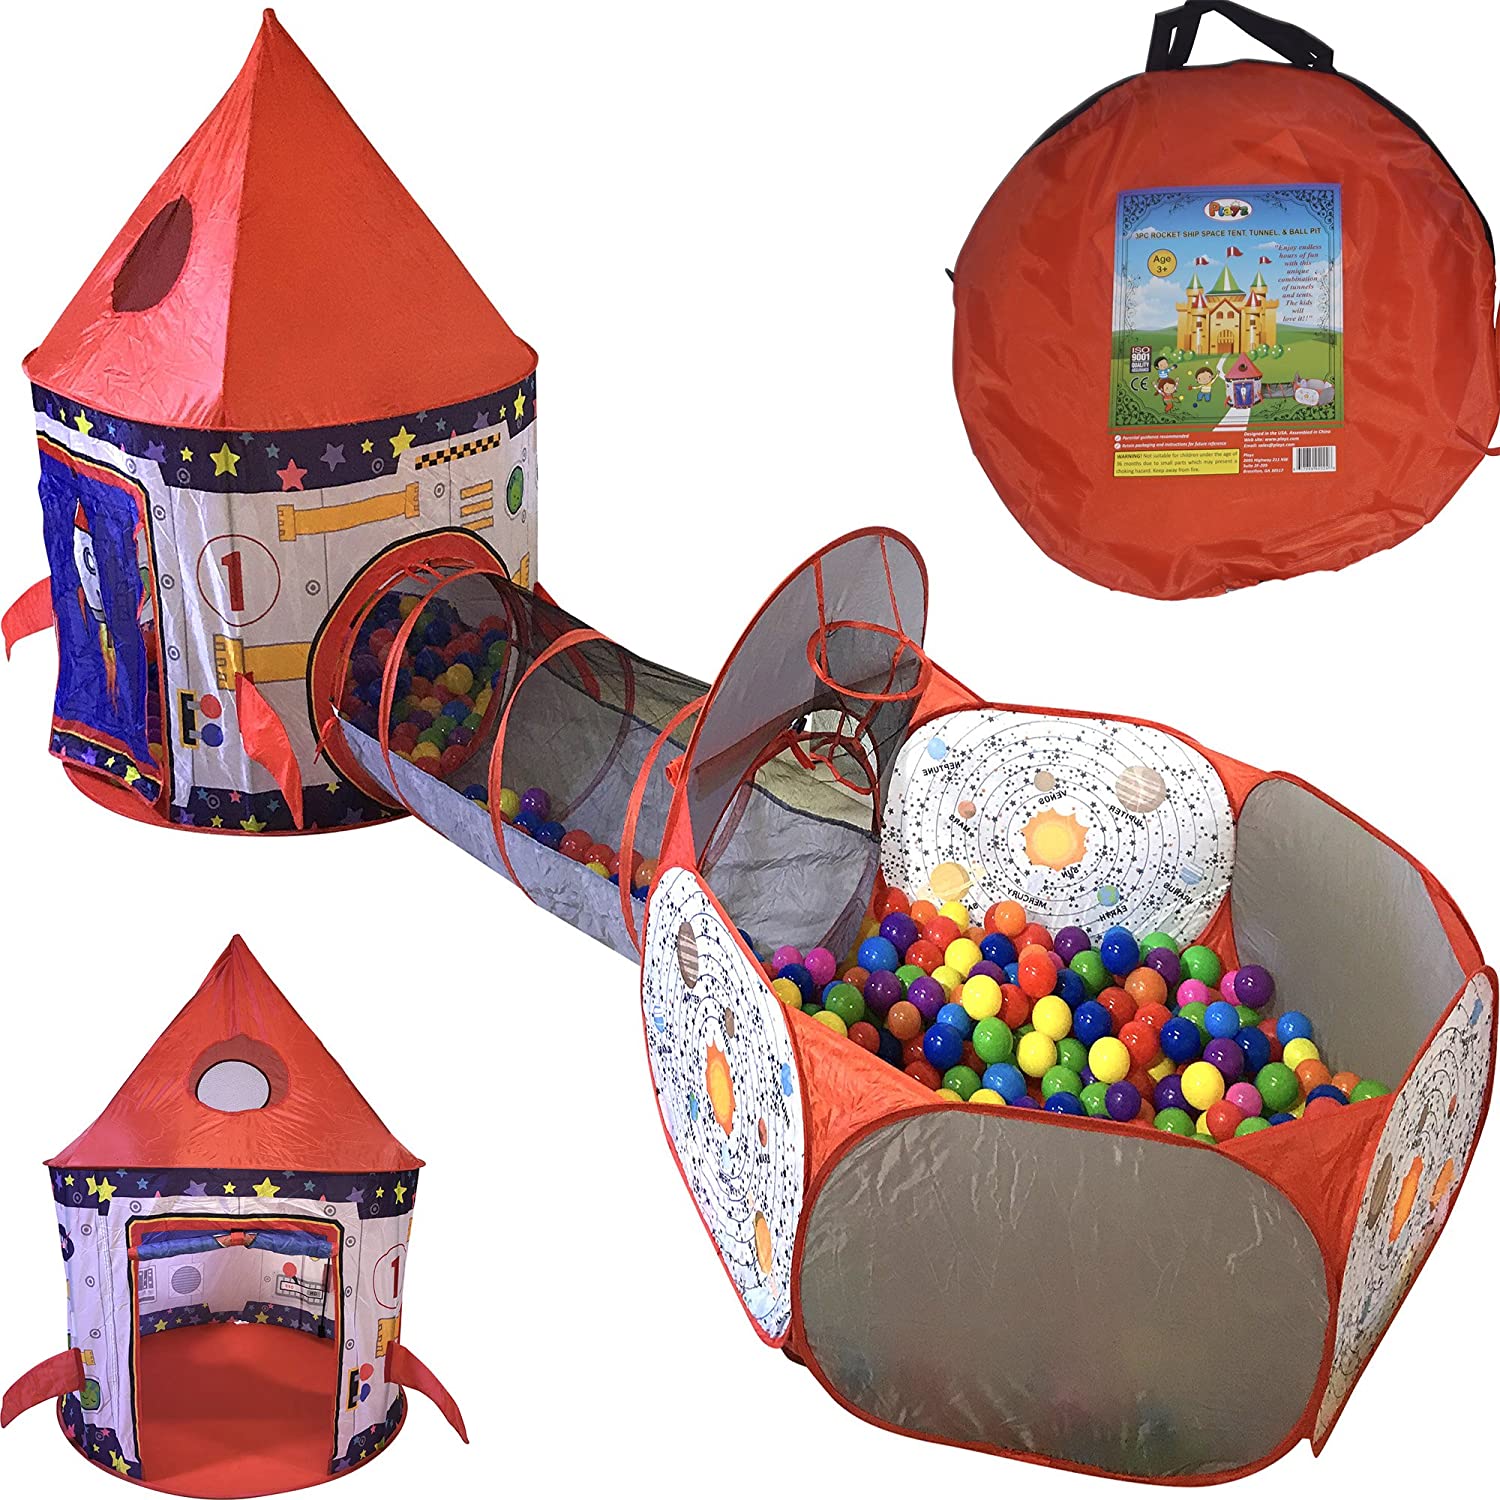 Top 9 Best Ball Pit for Kids Reviews in 2022 7